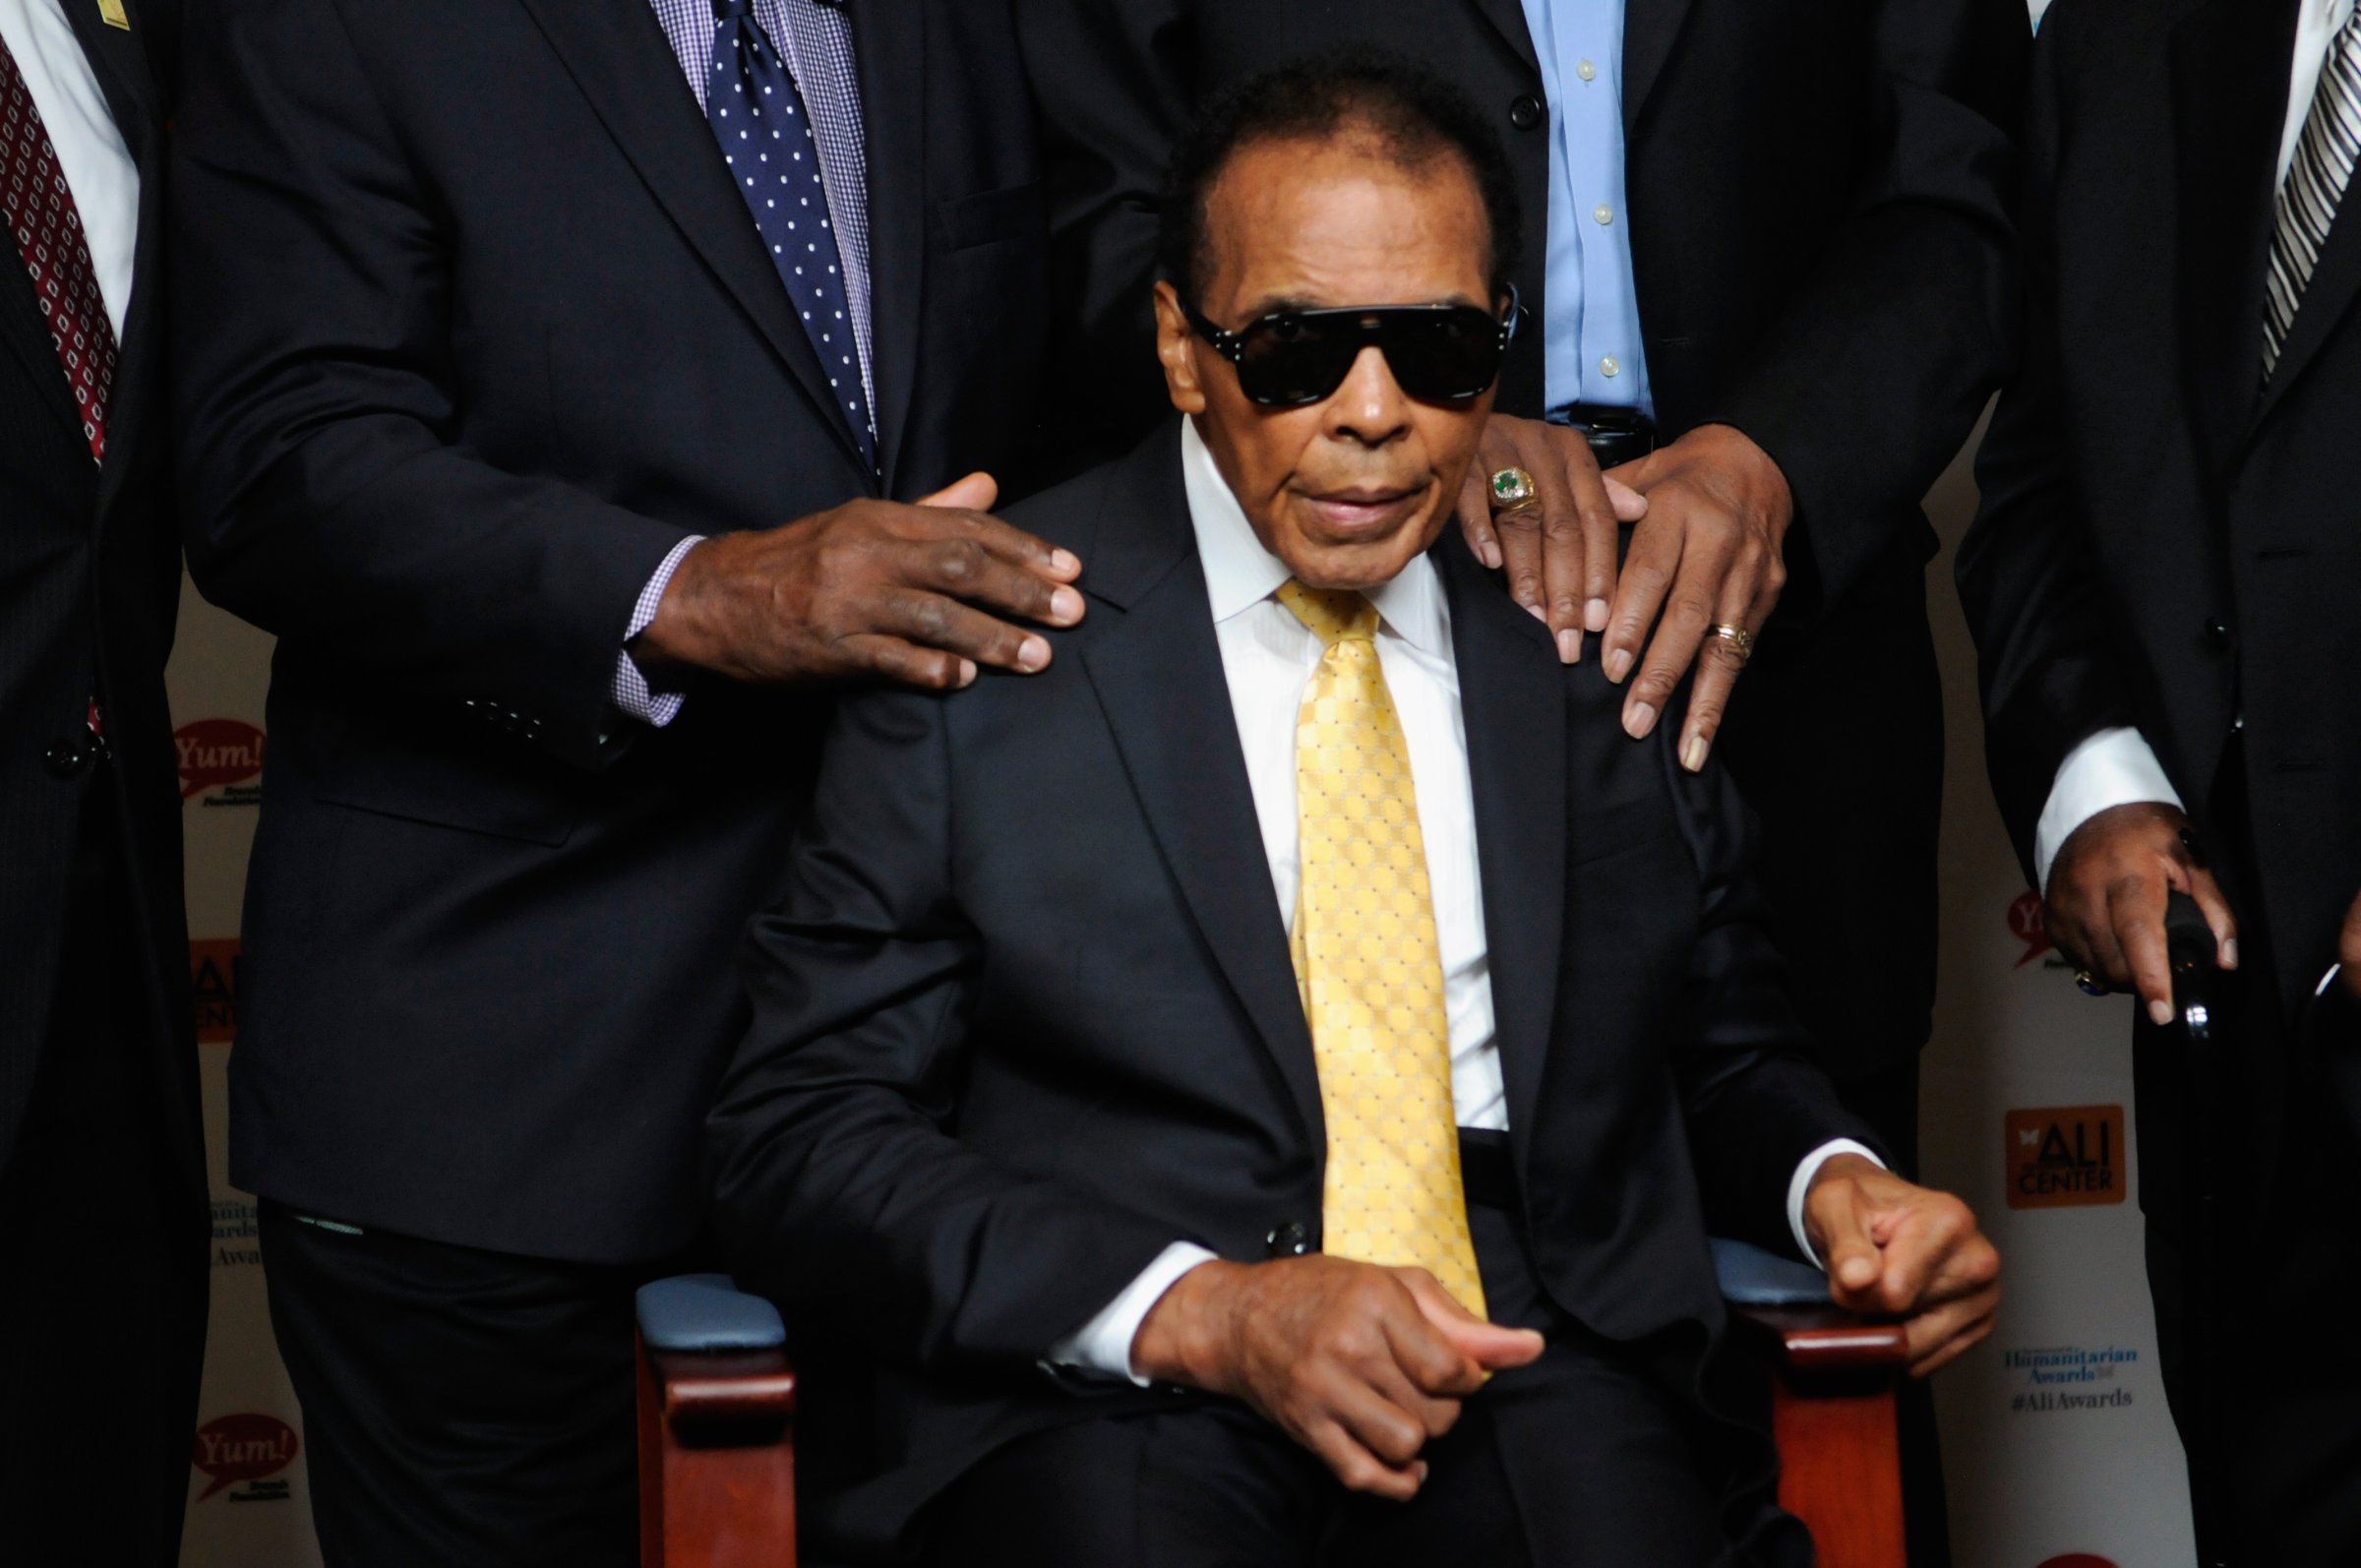 Muhammad Ali attends the 2014 Muhammad Ali Humanitarian Awards at the Louisville Marriott Downtown on September 27, 2014 in Louisville, United States.